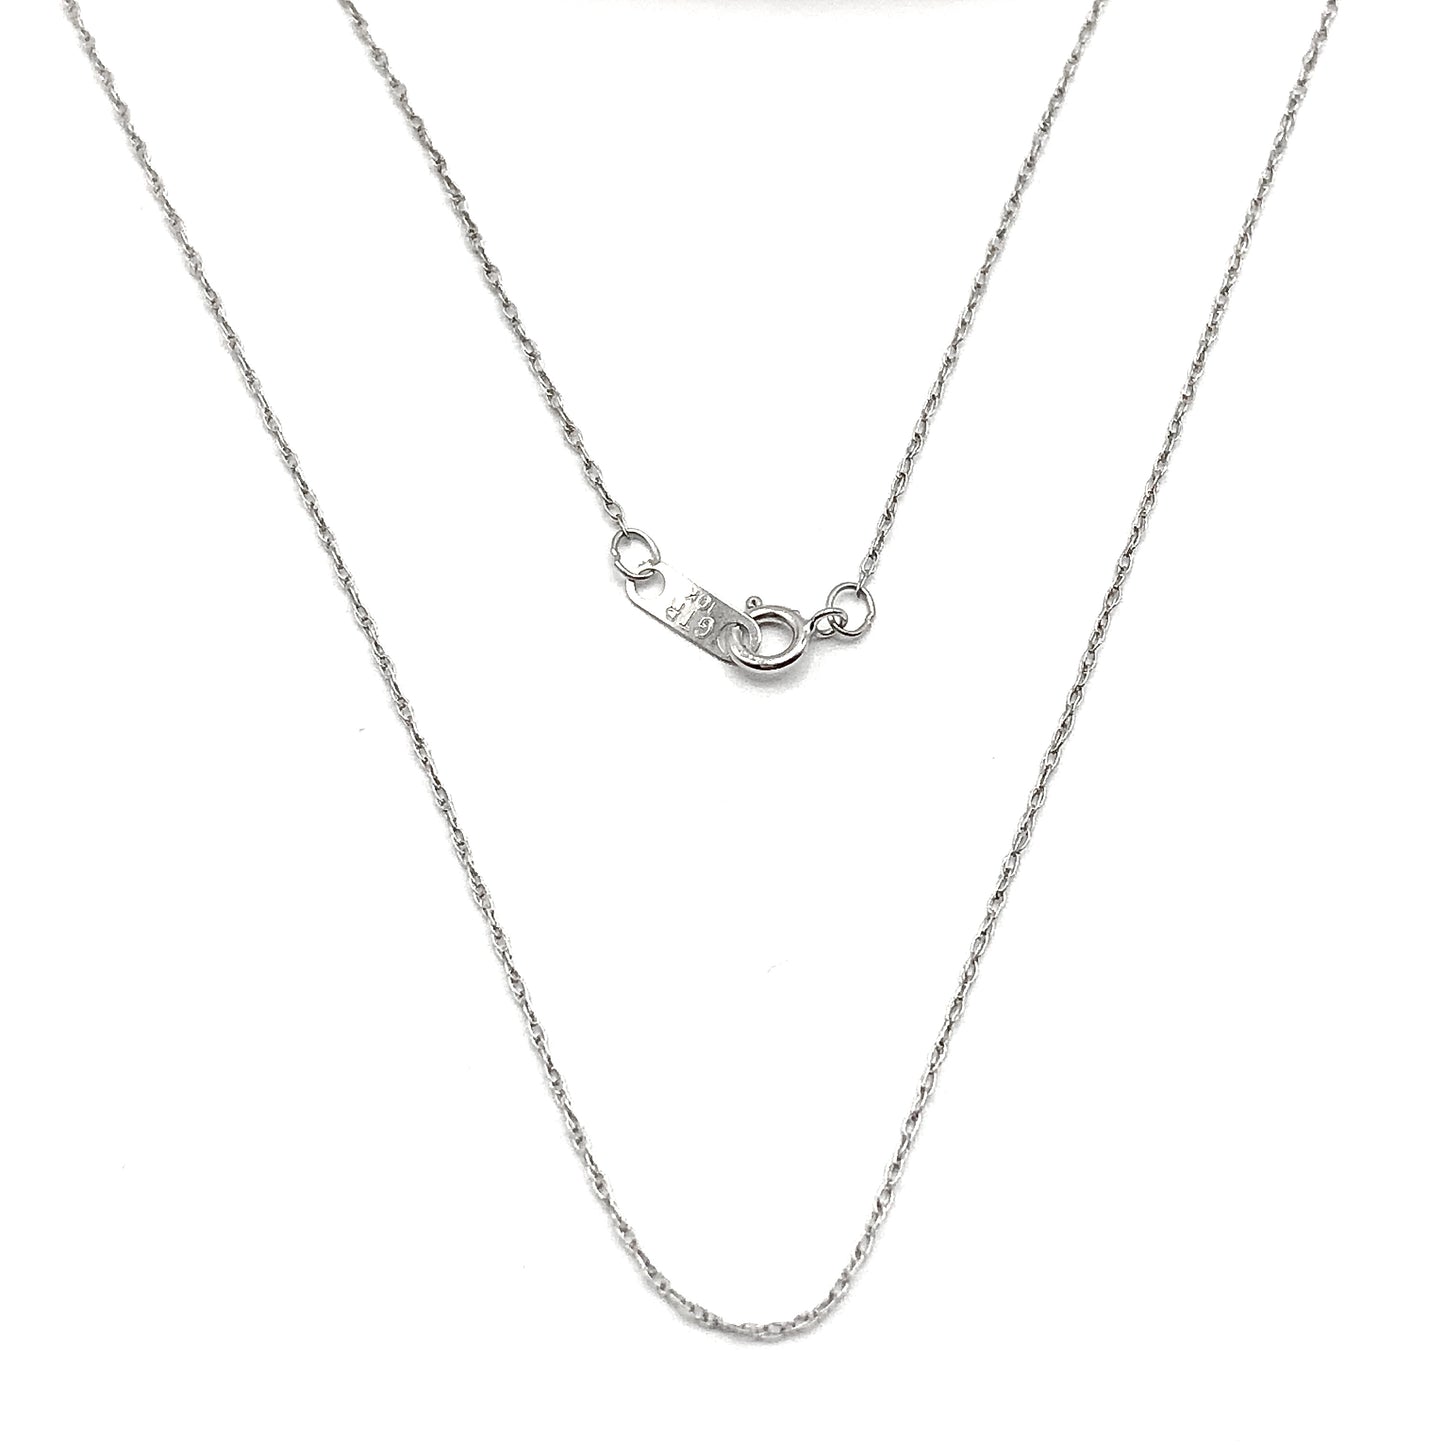 Necklace - Womens 10k White Gold 18in Delicate Thin Chain Necklace - New | Shop Local in the USA